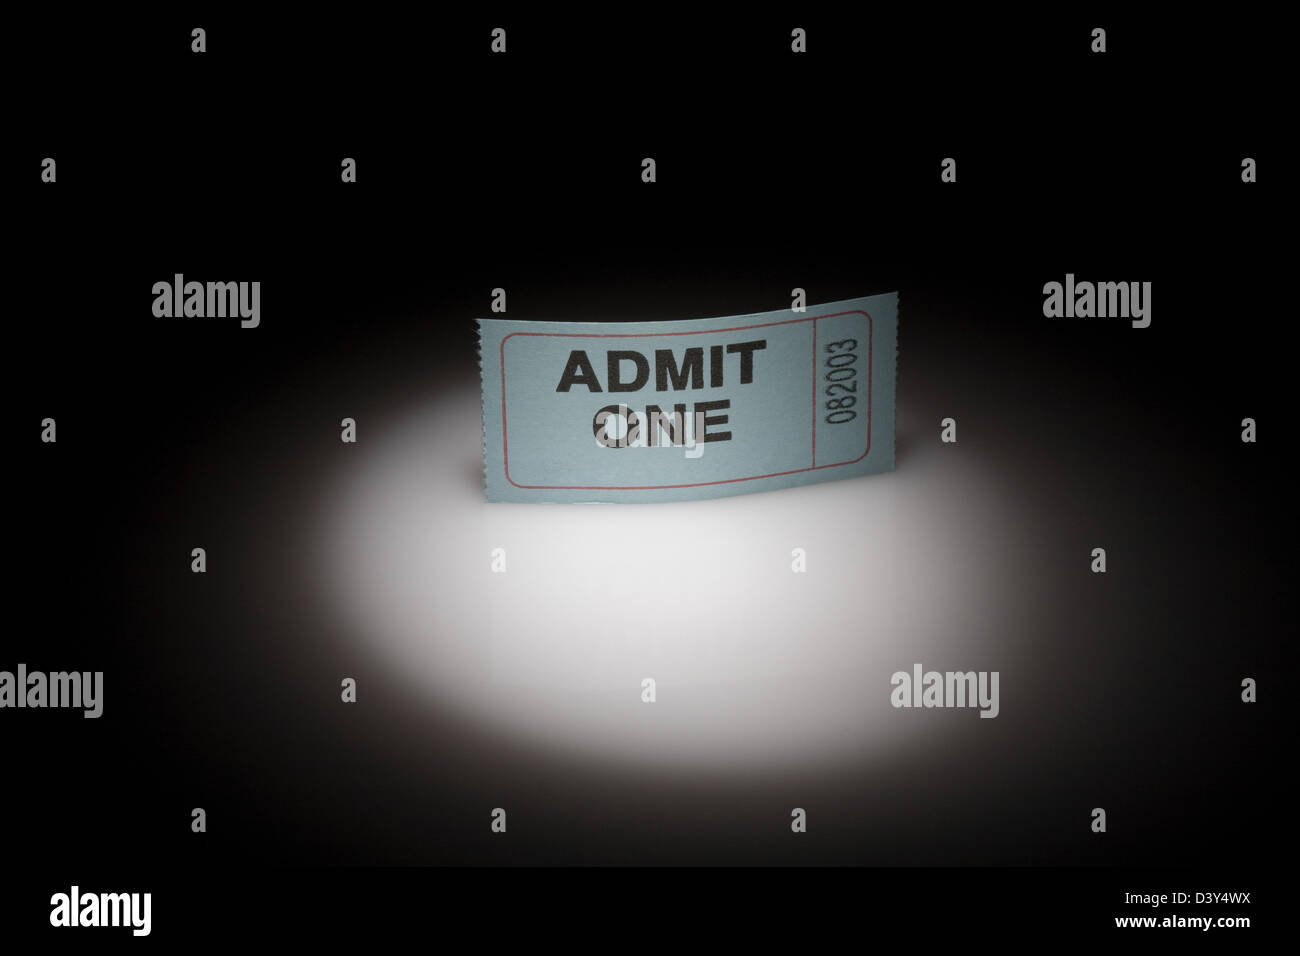 An event or admission ticket in a spotlight - admit one. Stock Photo